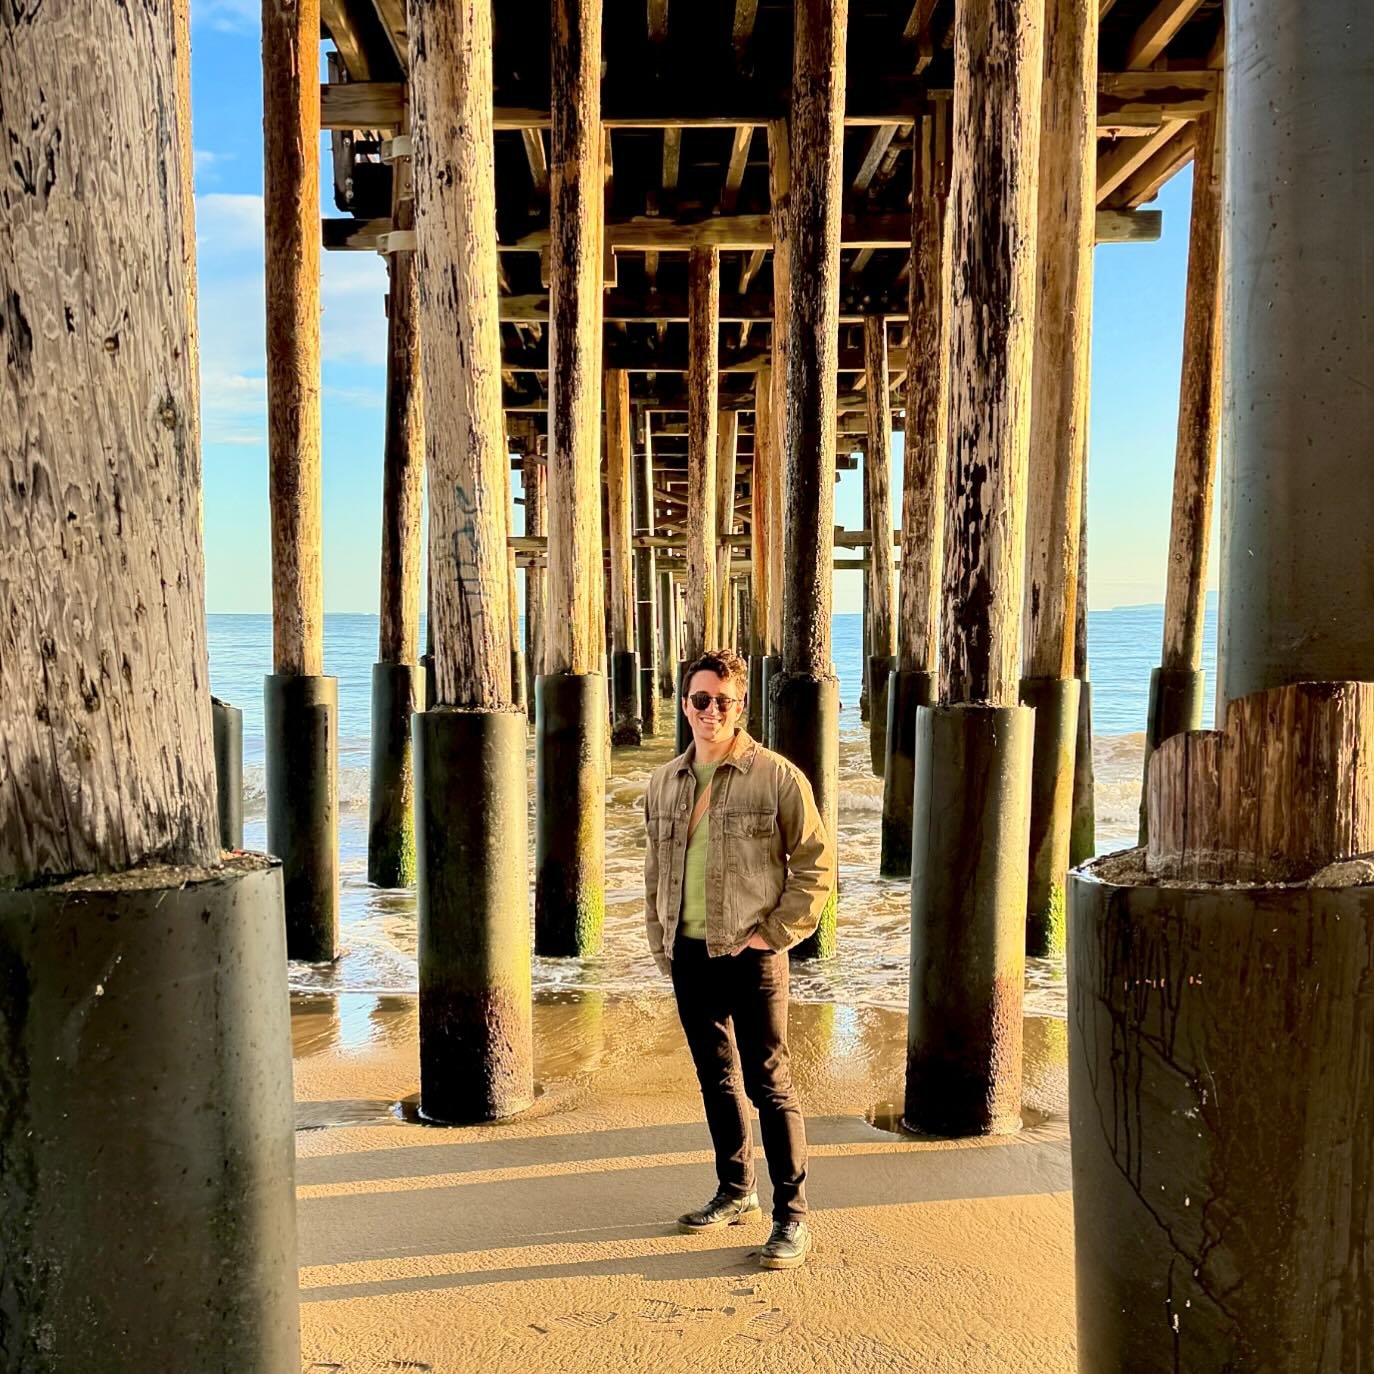 First person to ever take a photo UNDER the boardwalk wow